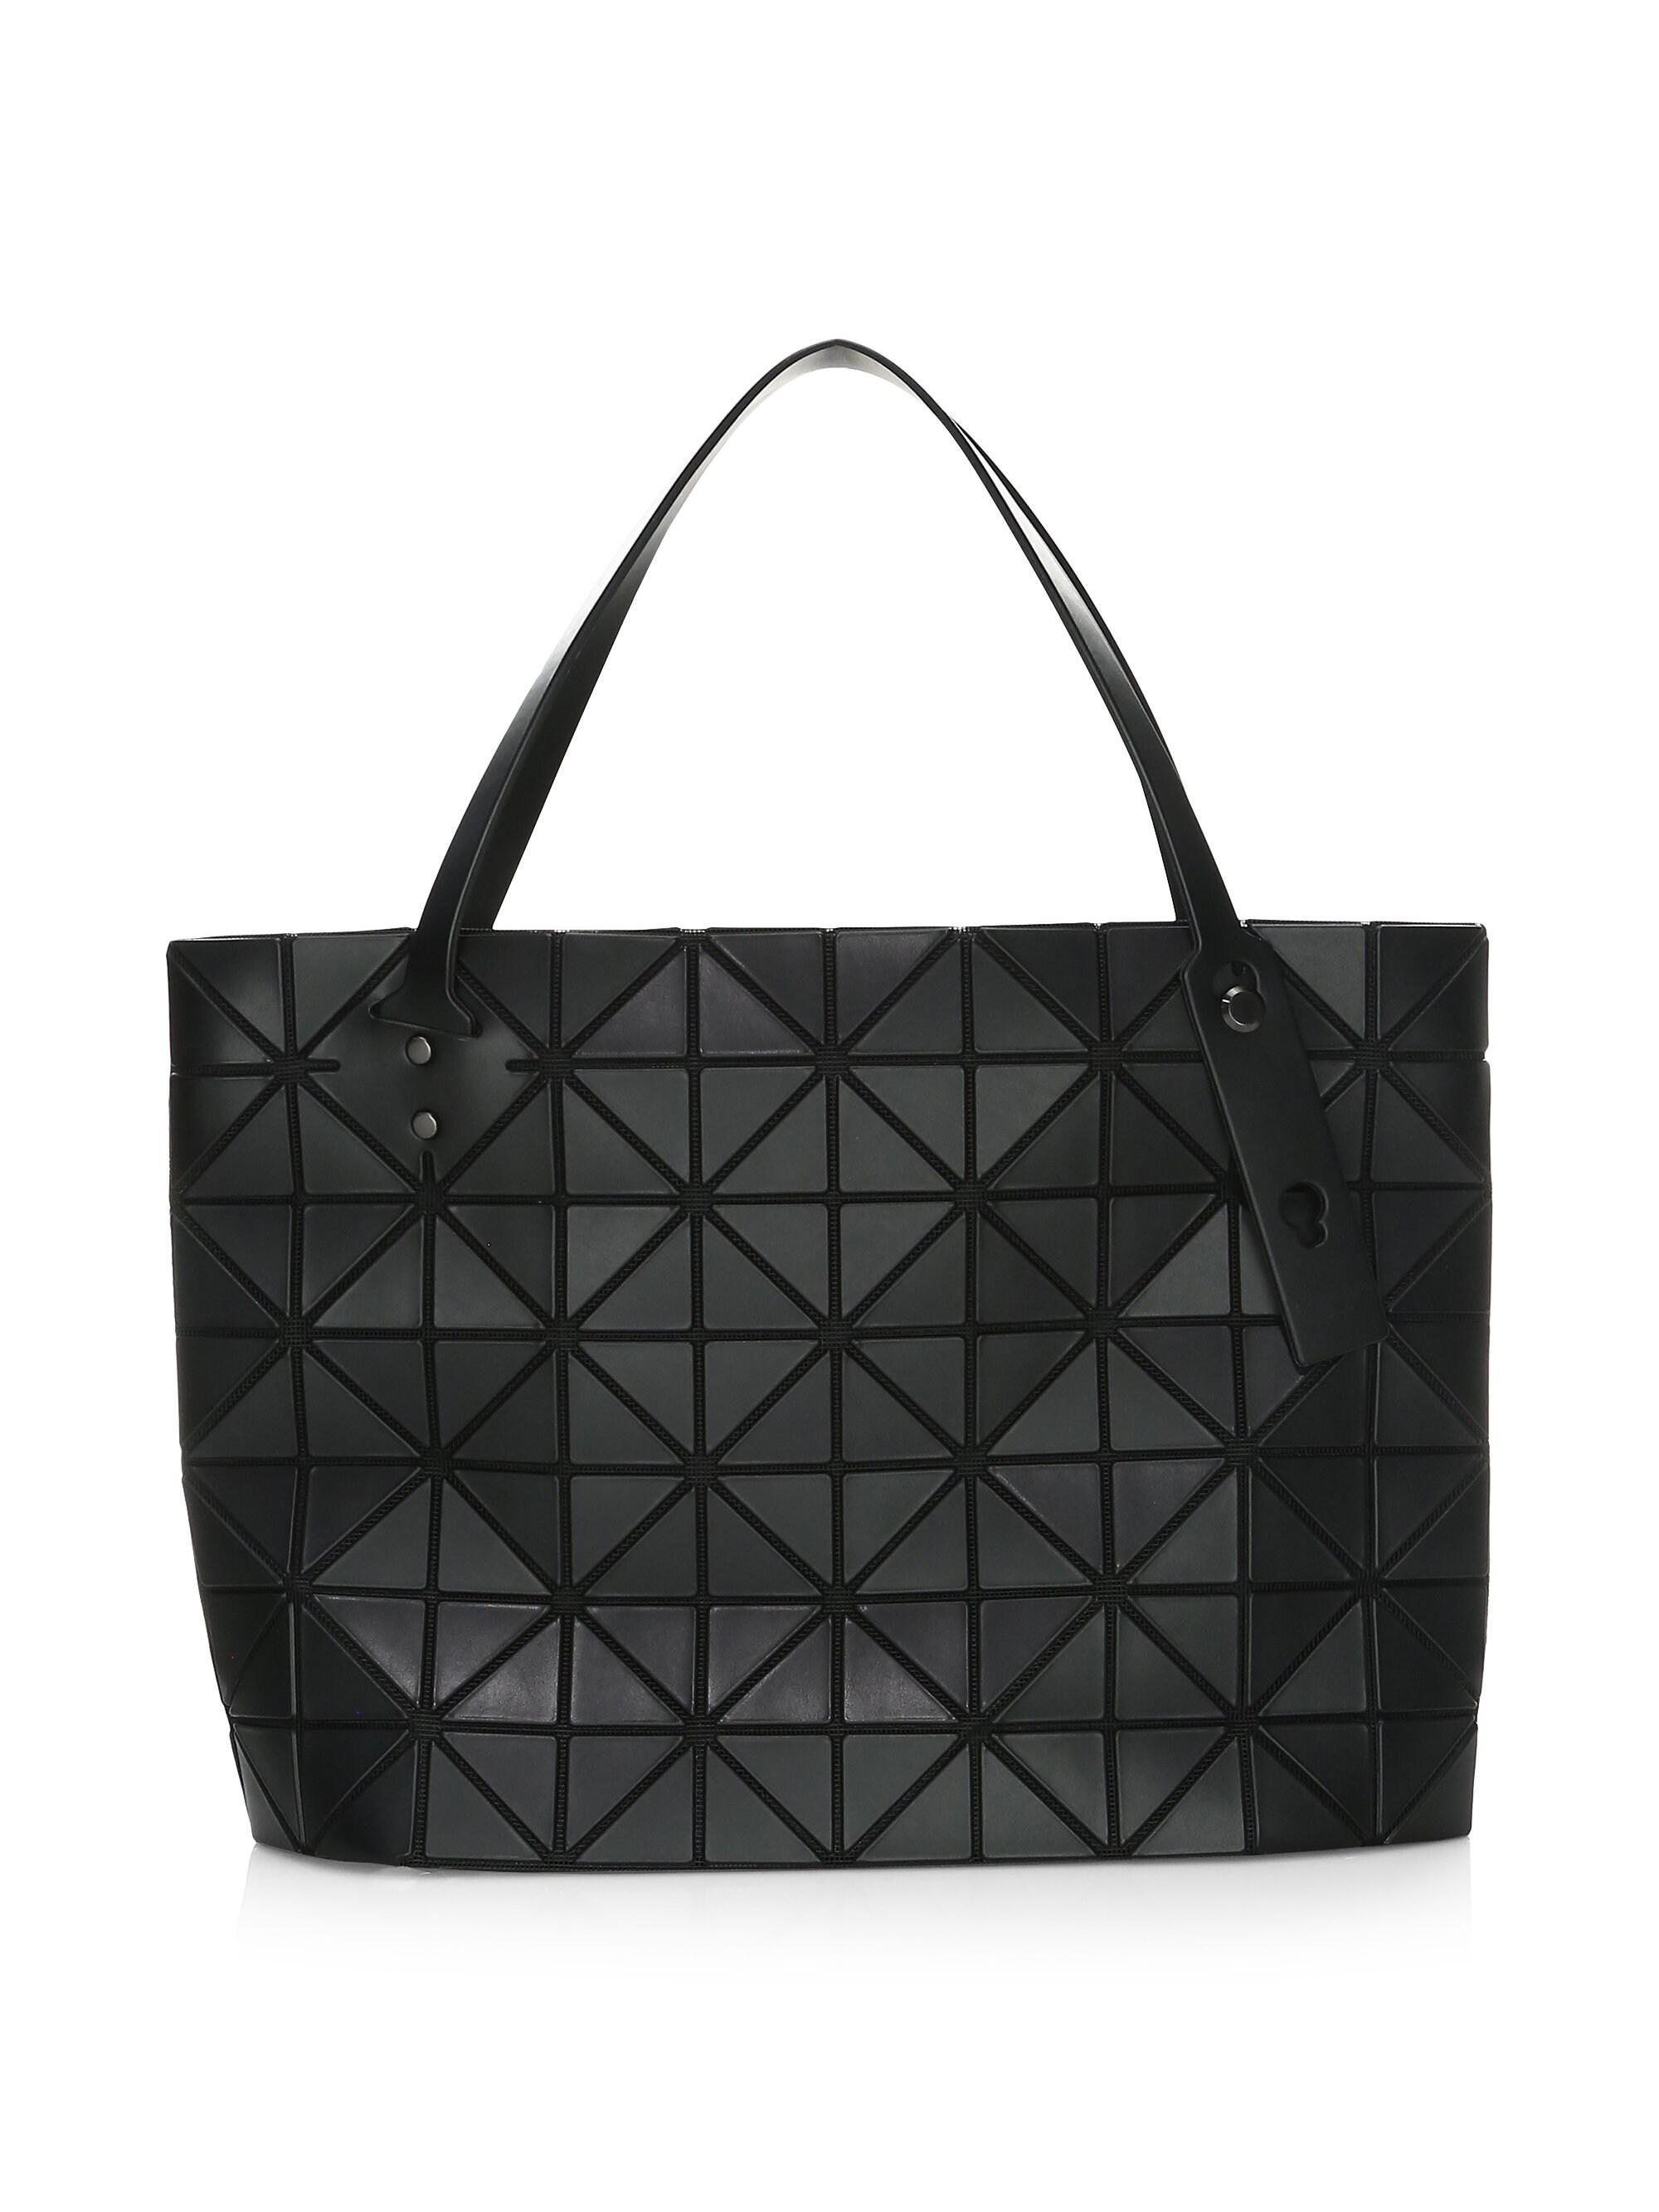 Bao Bao Issey Miyake Synthetic Rock Matte Tote in Black - Lyst